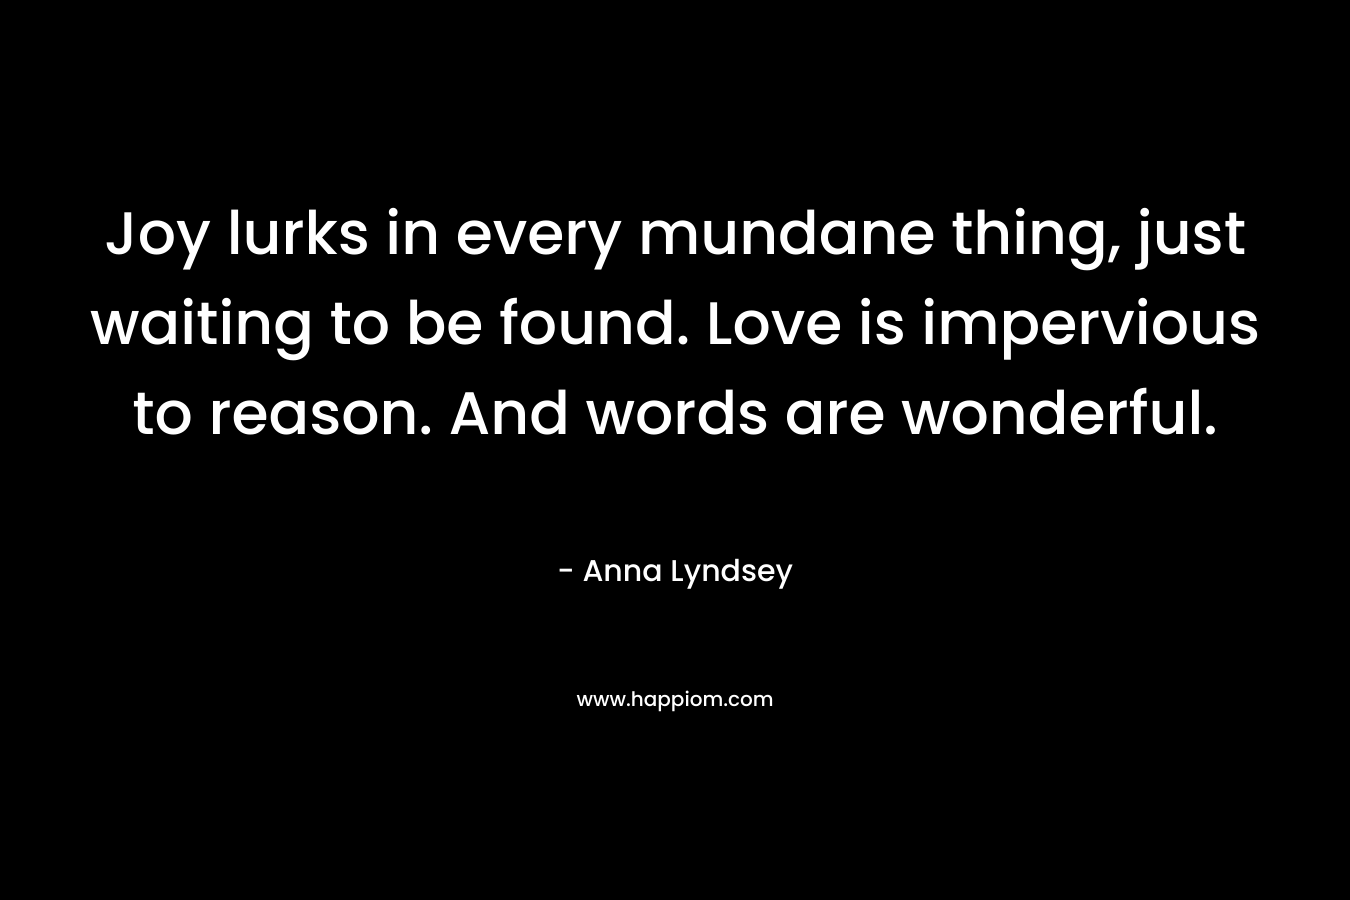 Joy lurks in every mundane thing, just waiting to be found. Love is impervious to reason. And words are wonderful.